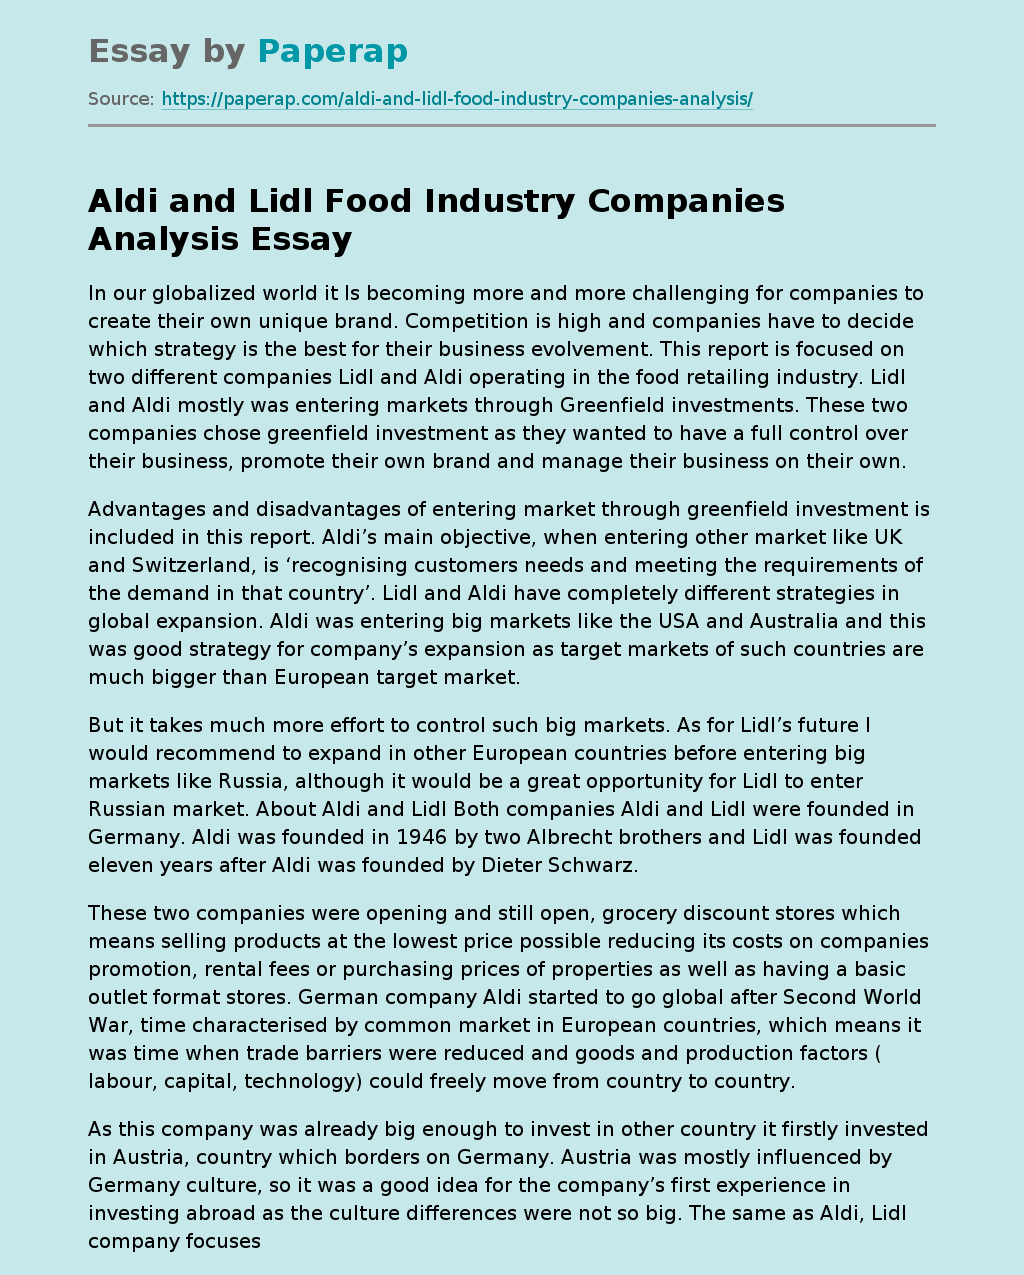 Aldi and Lidl Food Industry Companies Analysis